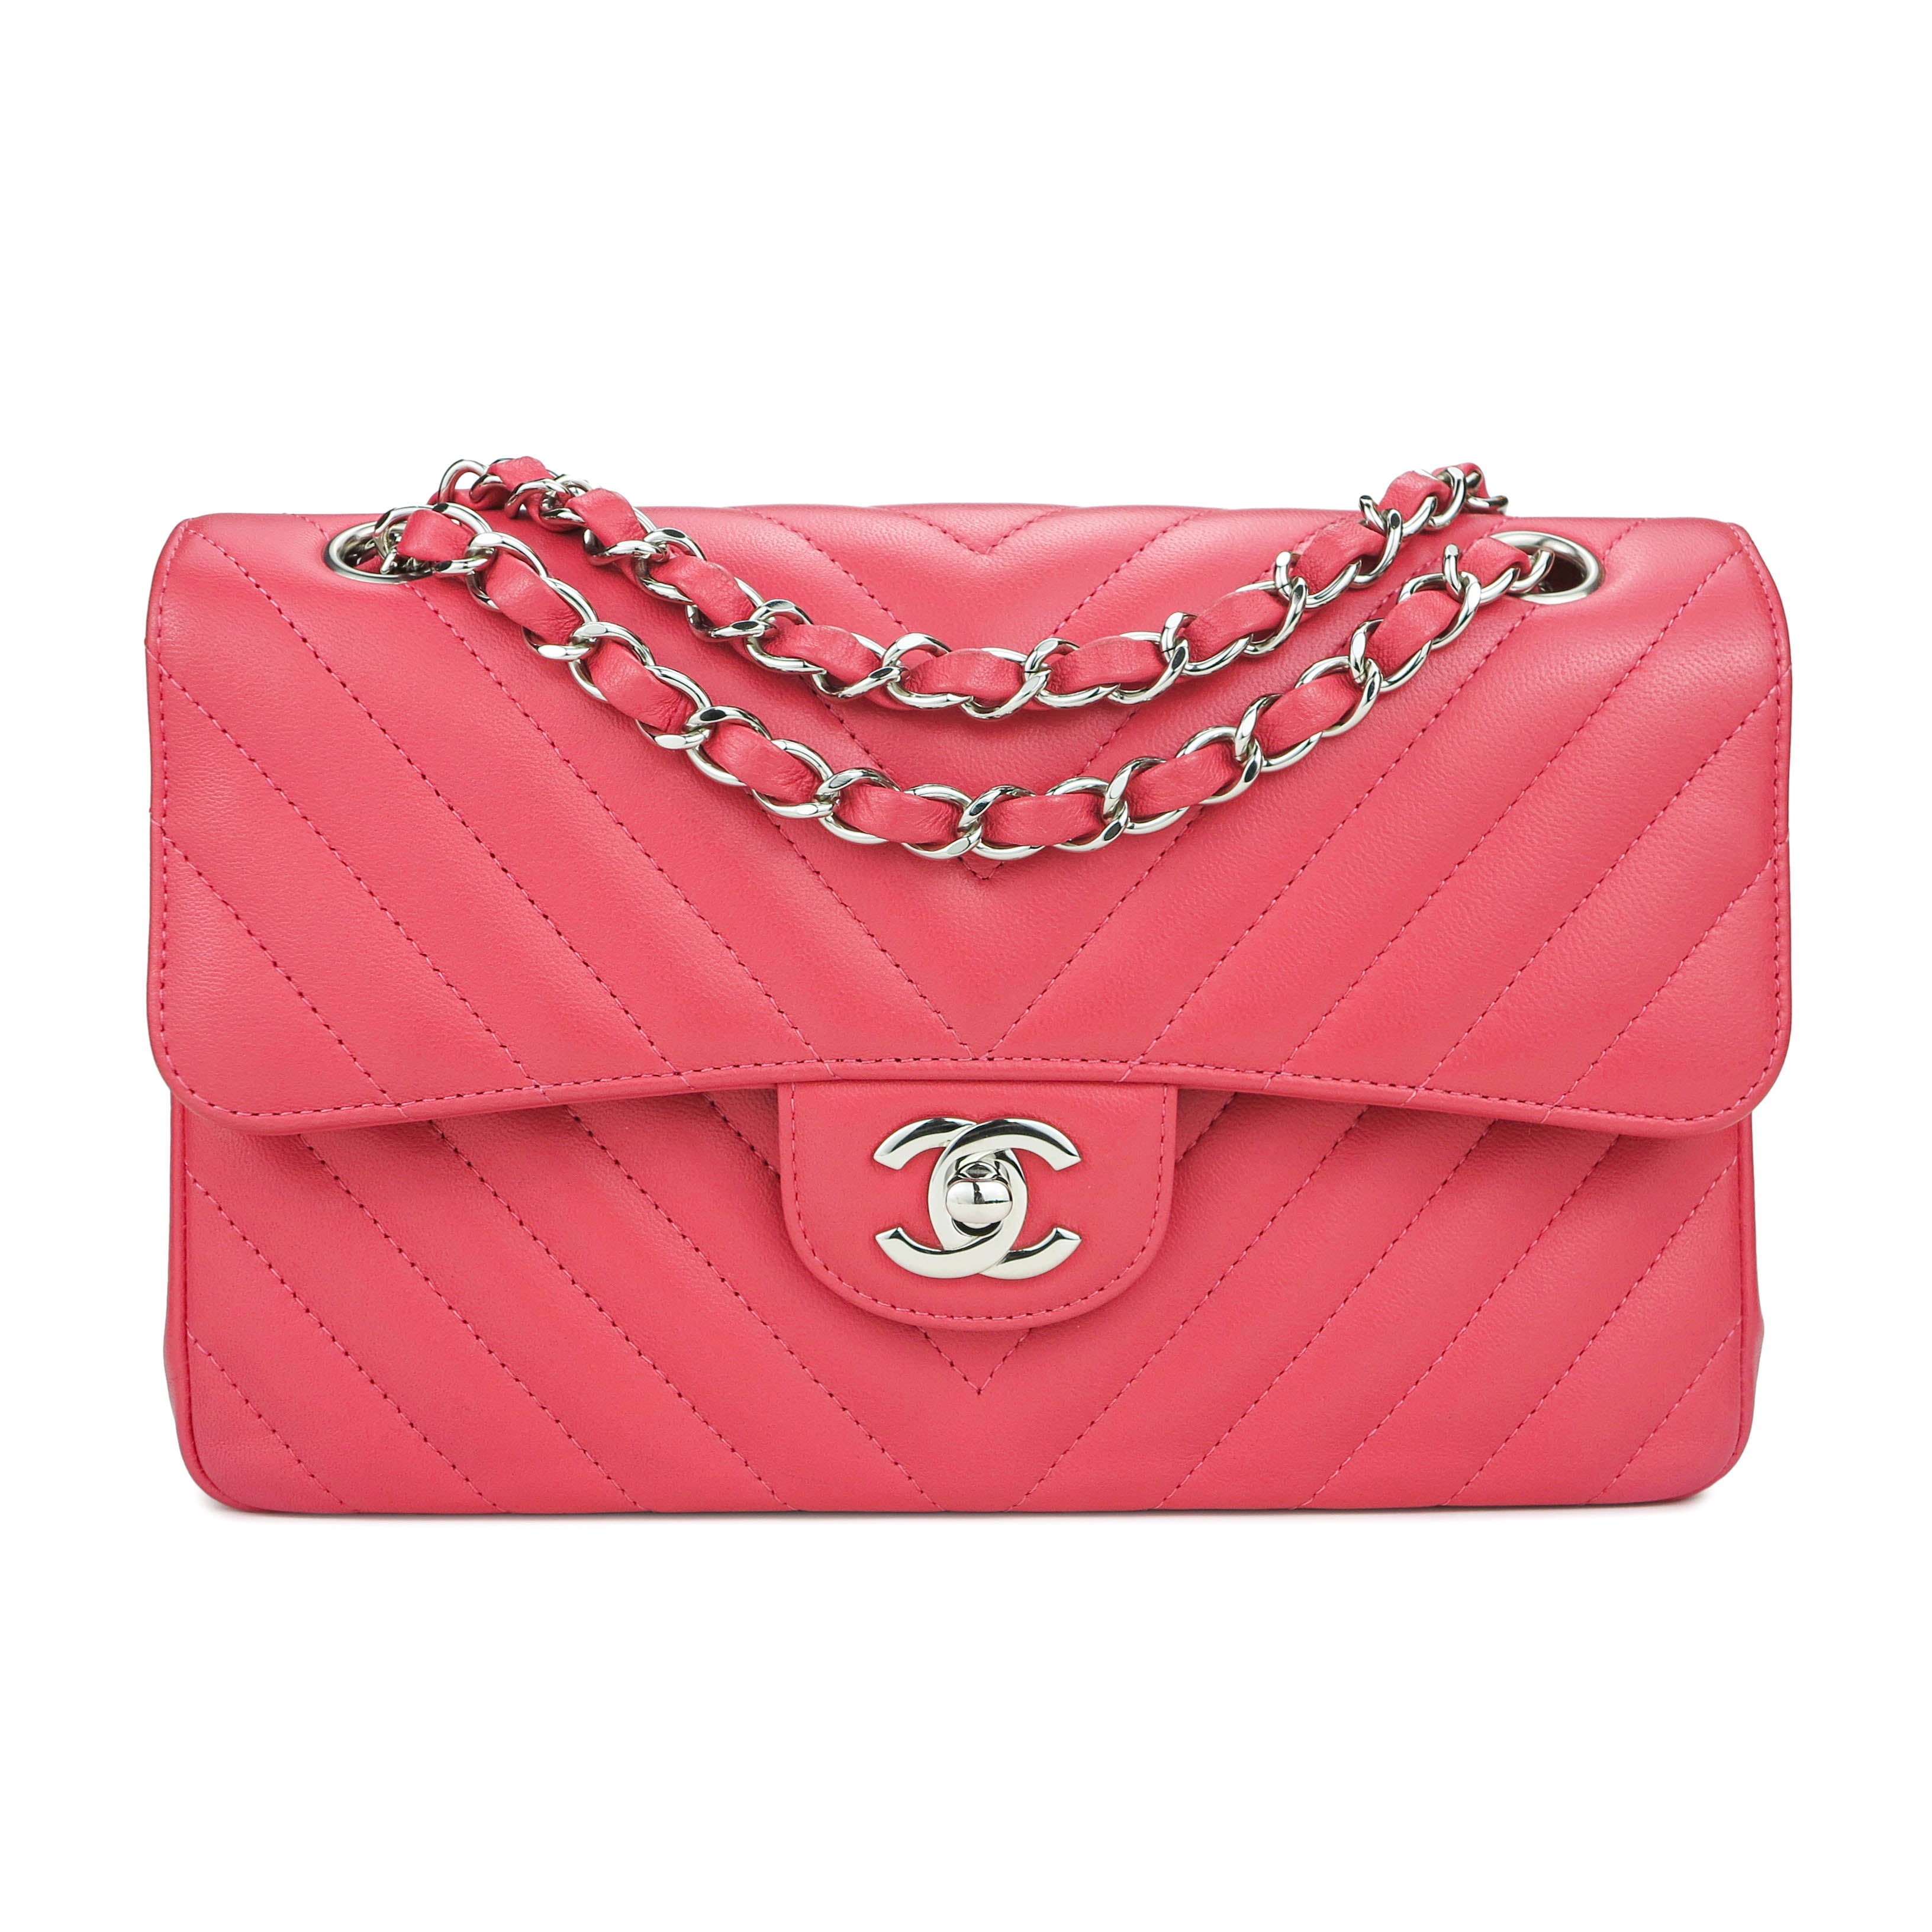 red chanel 5.5